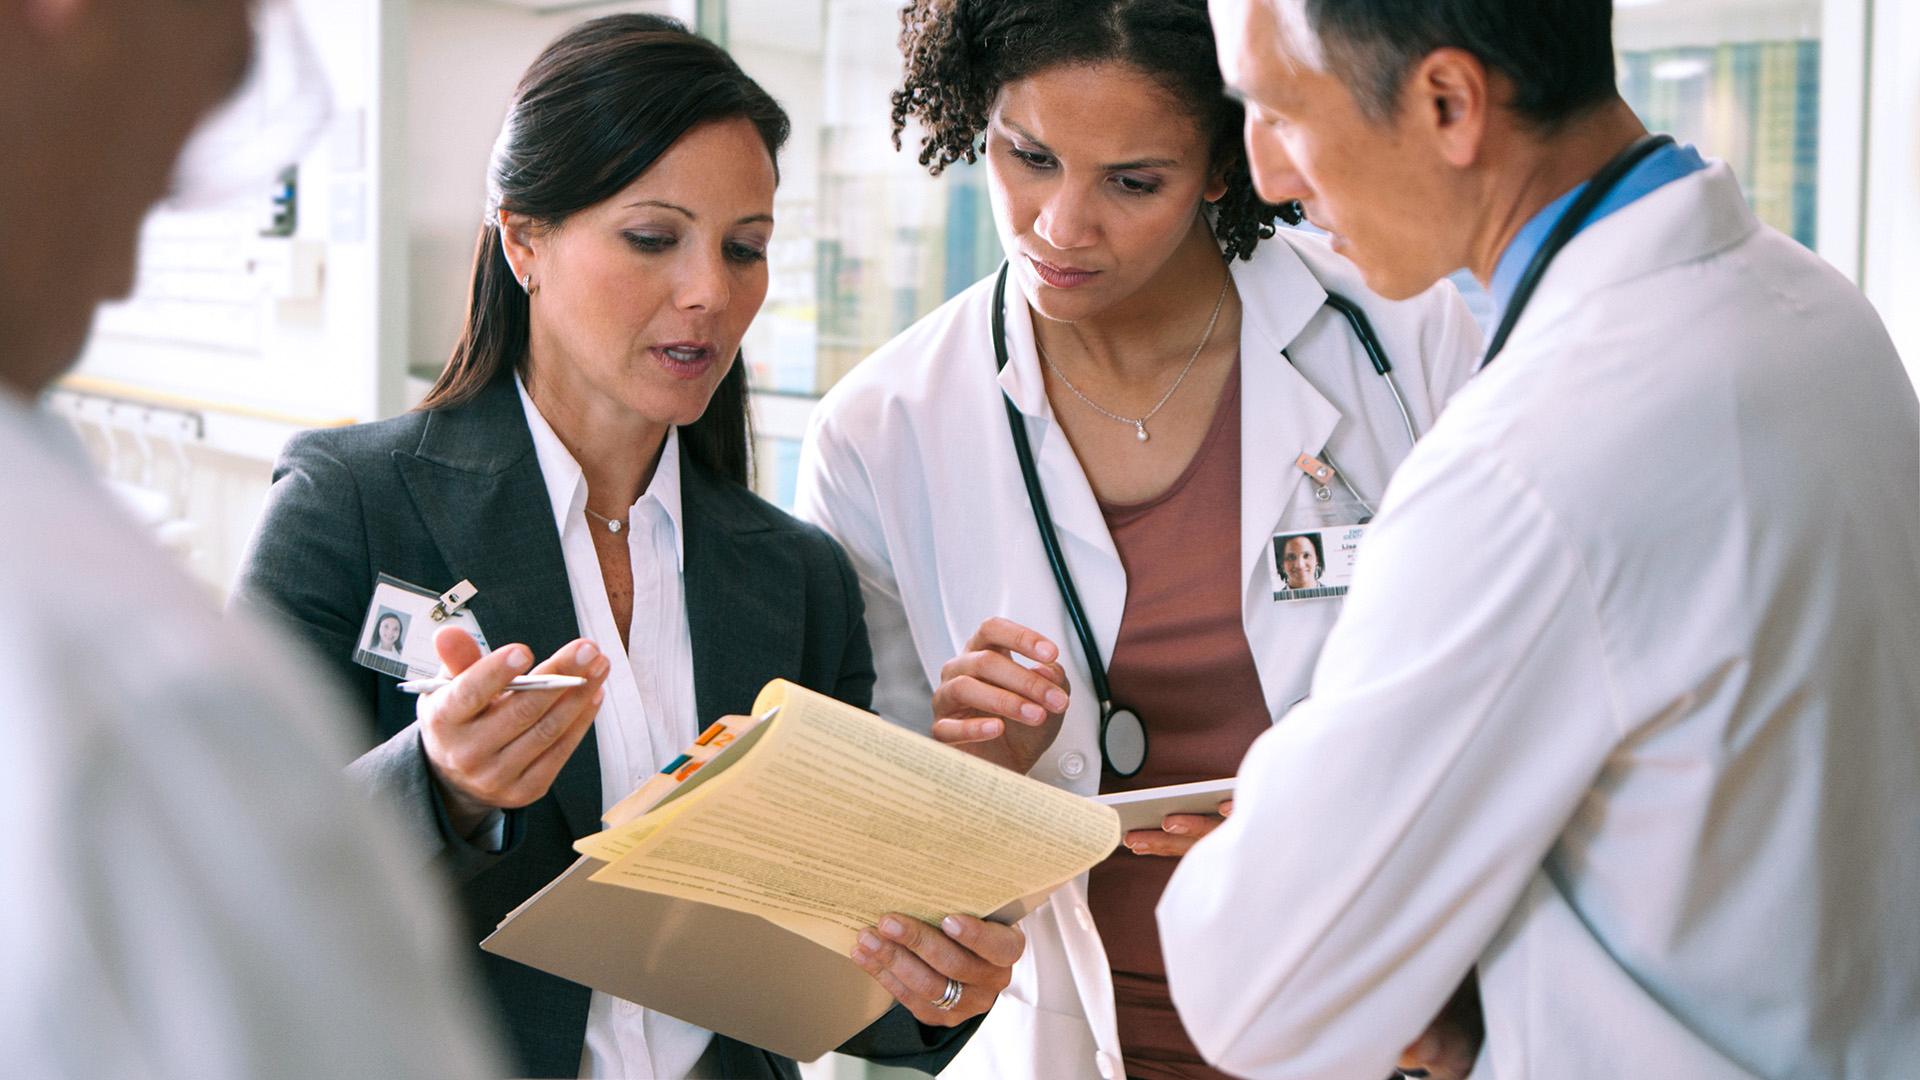 A group of physicians looking at a patients chart.